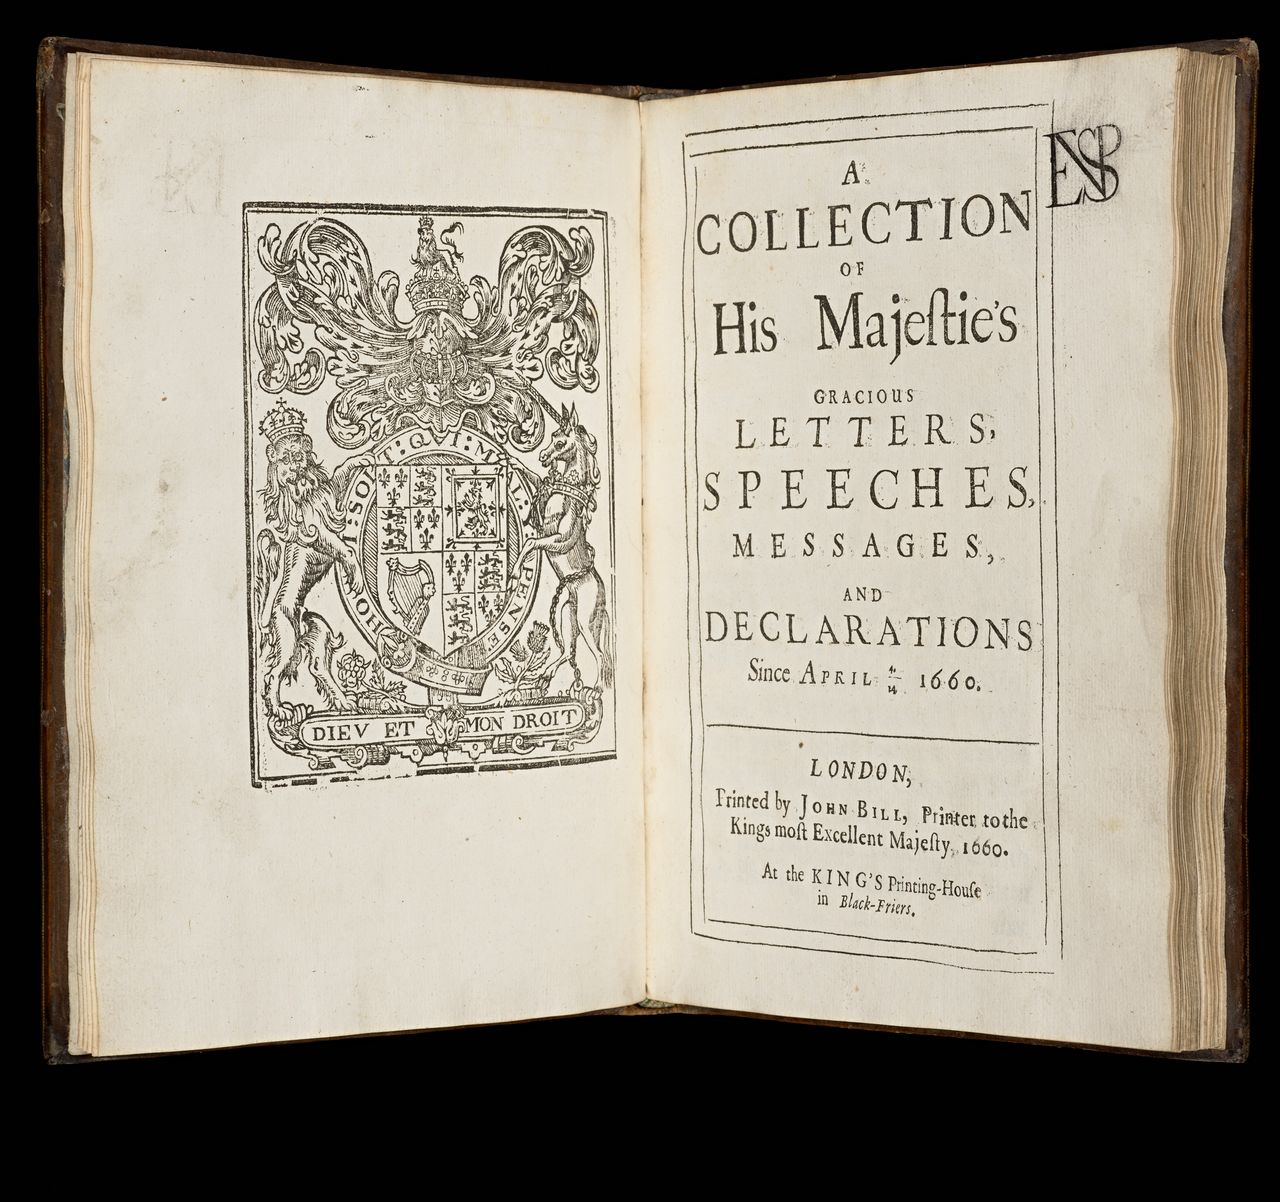 <em>A collection of His Majestie's gracious letters, speeches, messages, and declarations since April 4./14. 1660</em>, London, printed by John Bill, printer to the Kings most excellent Majesty, at the King's Printing-House in Black-Friers, 1660, State Library Victoria, Melbourne (RAREEMM 135/14)